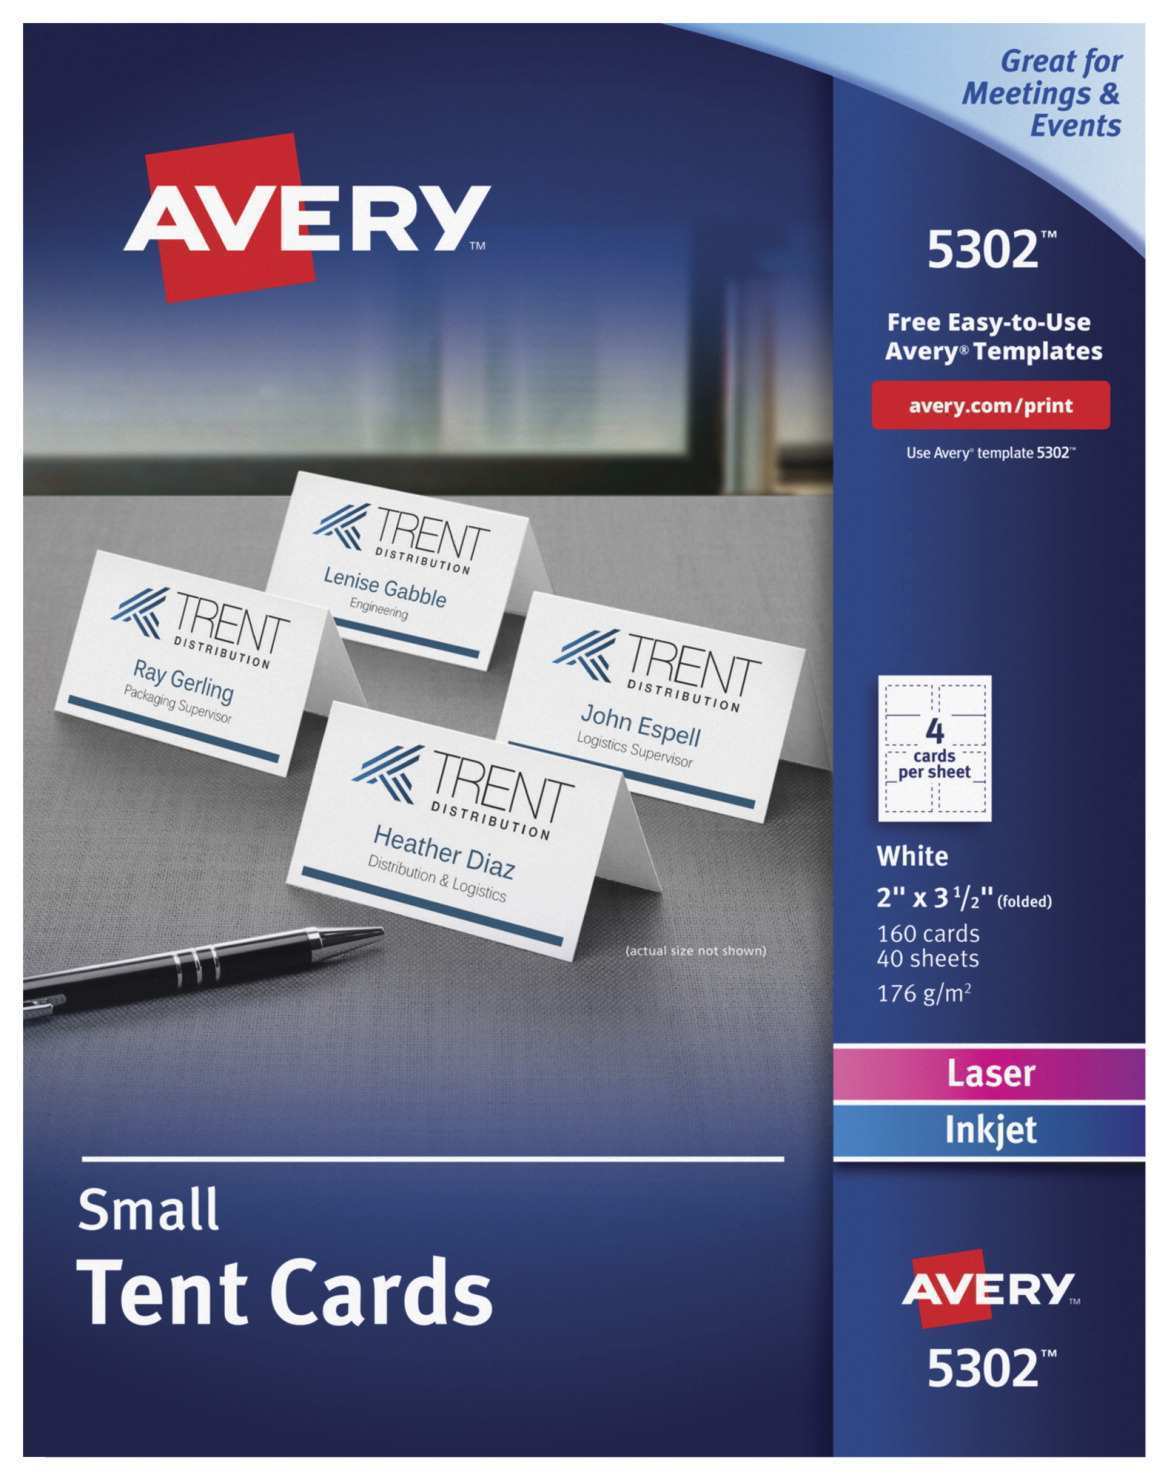 Avery 5302 Template